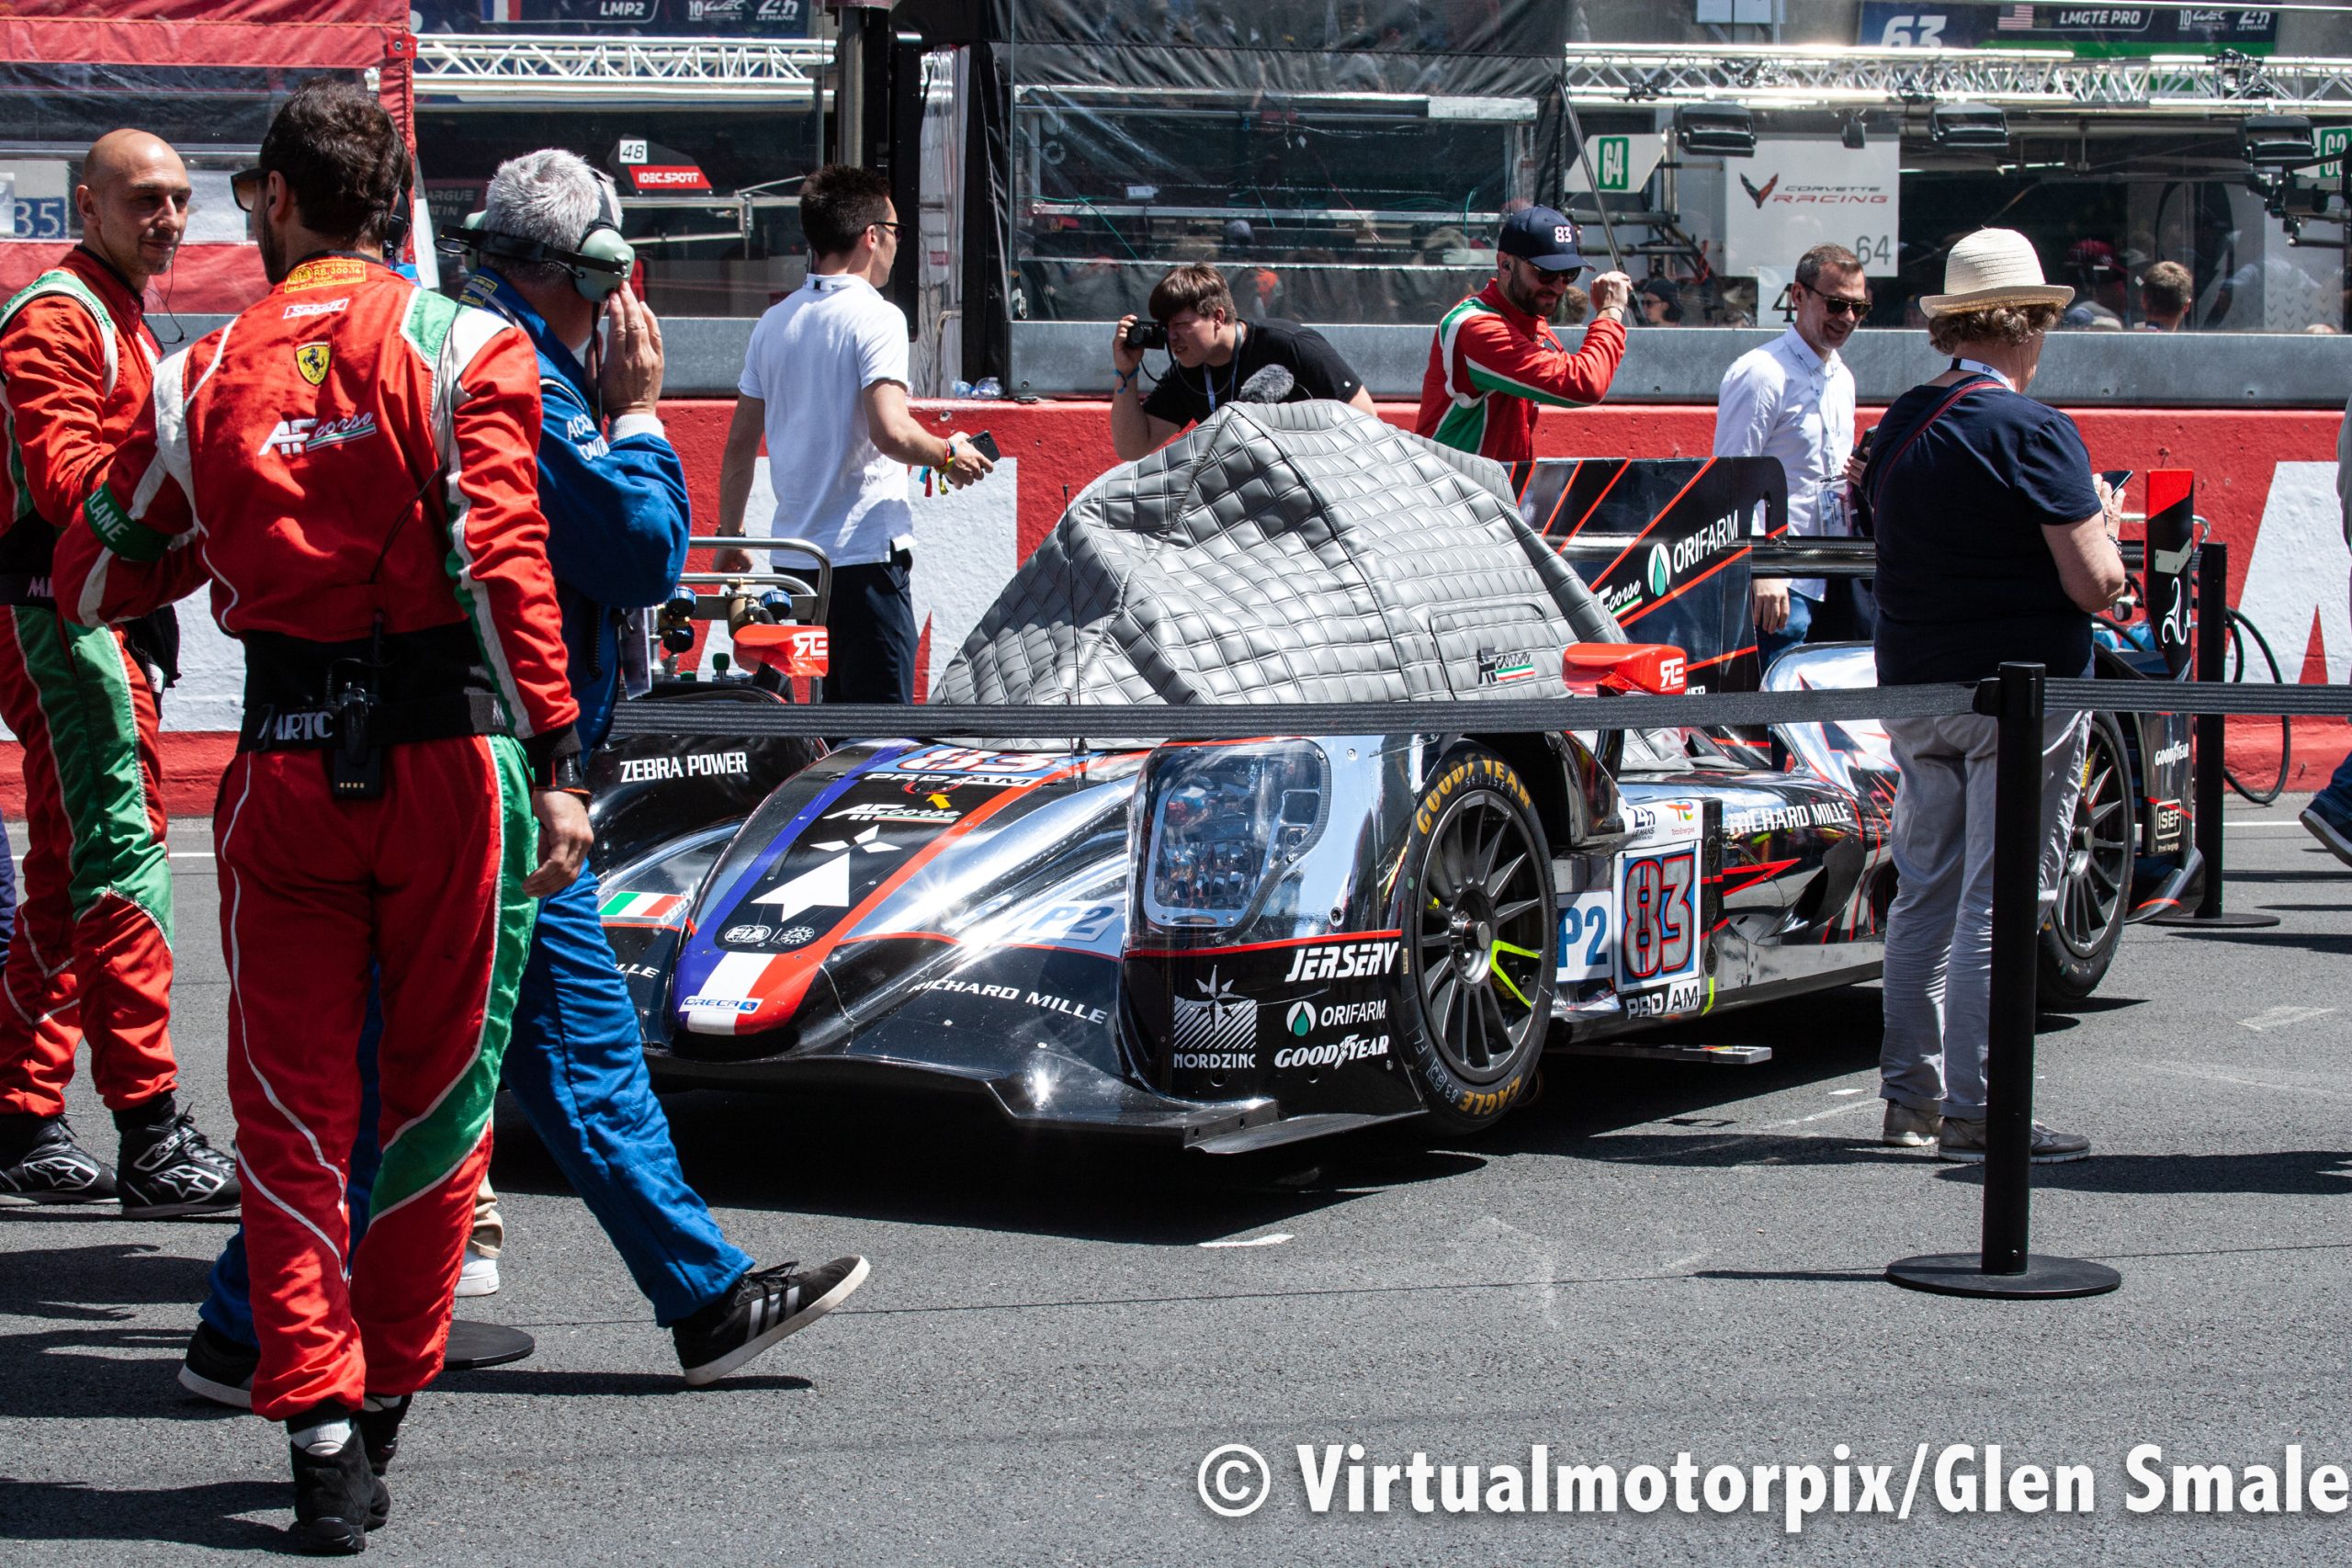 The No. 83 LMP2 AF Corse Oreca 07 driven by Perrodo/Nielsen/Rovera on the pre-race grid